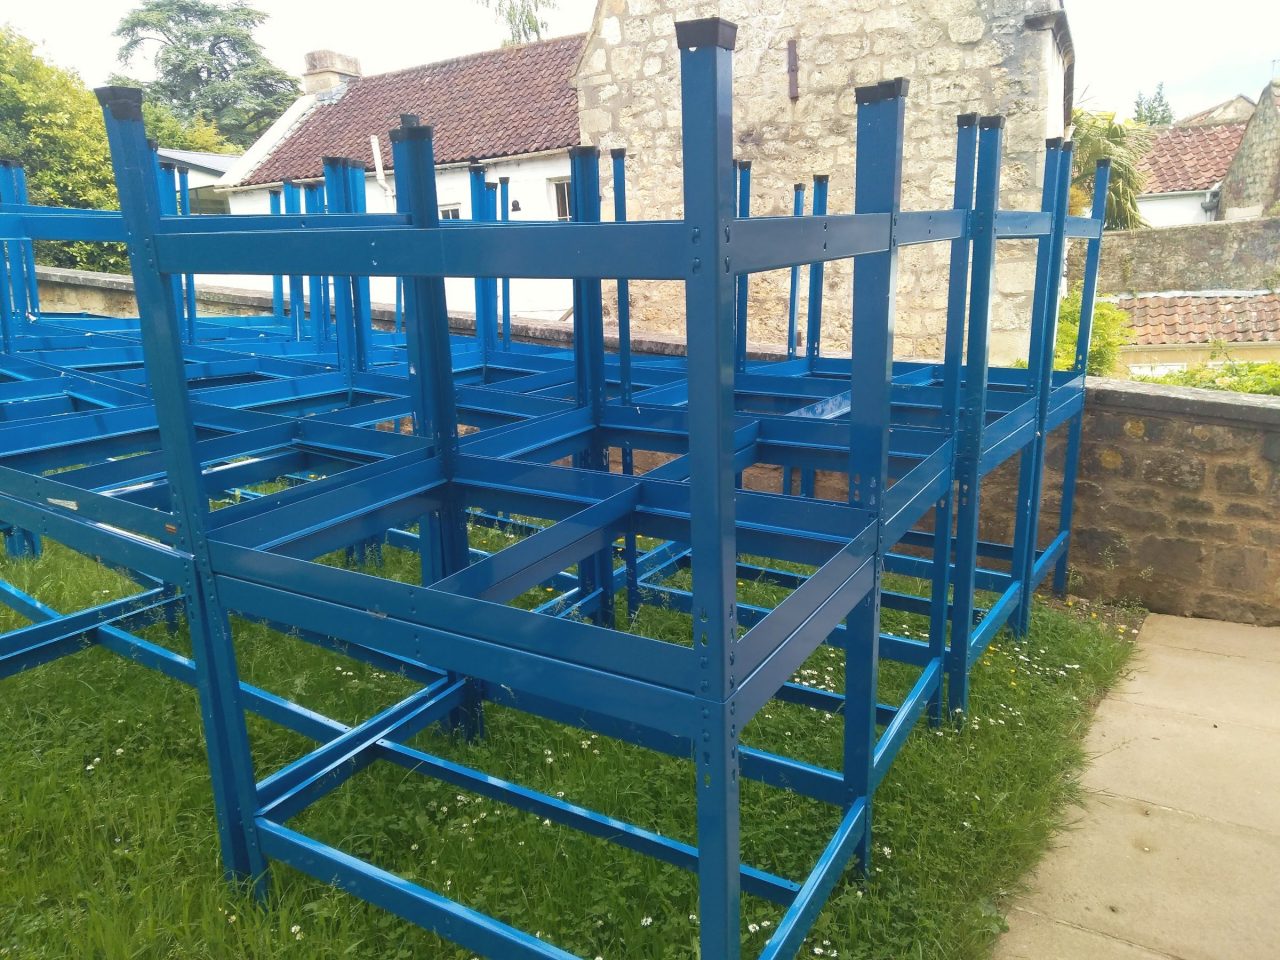 Untitled, painted metal bench frames, grass, dimensions variable, 2019 NFS